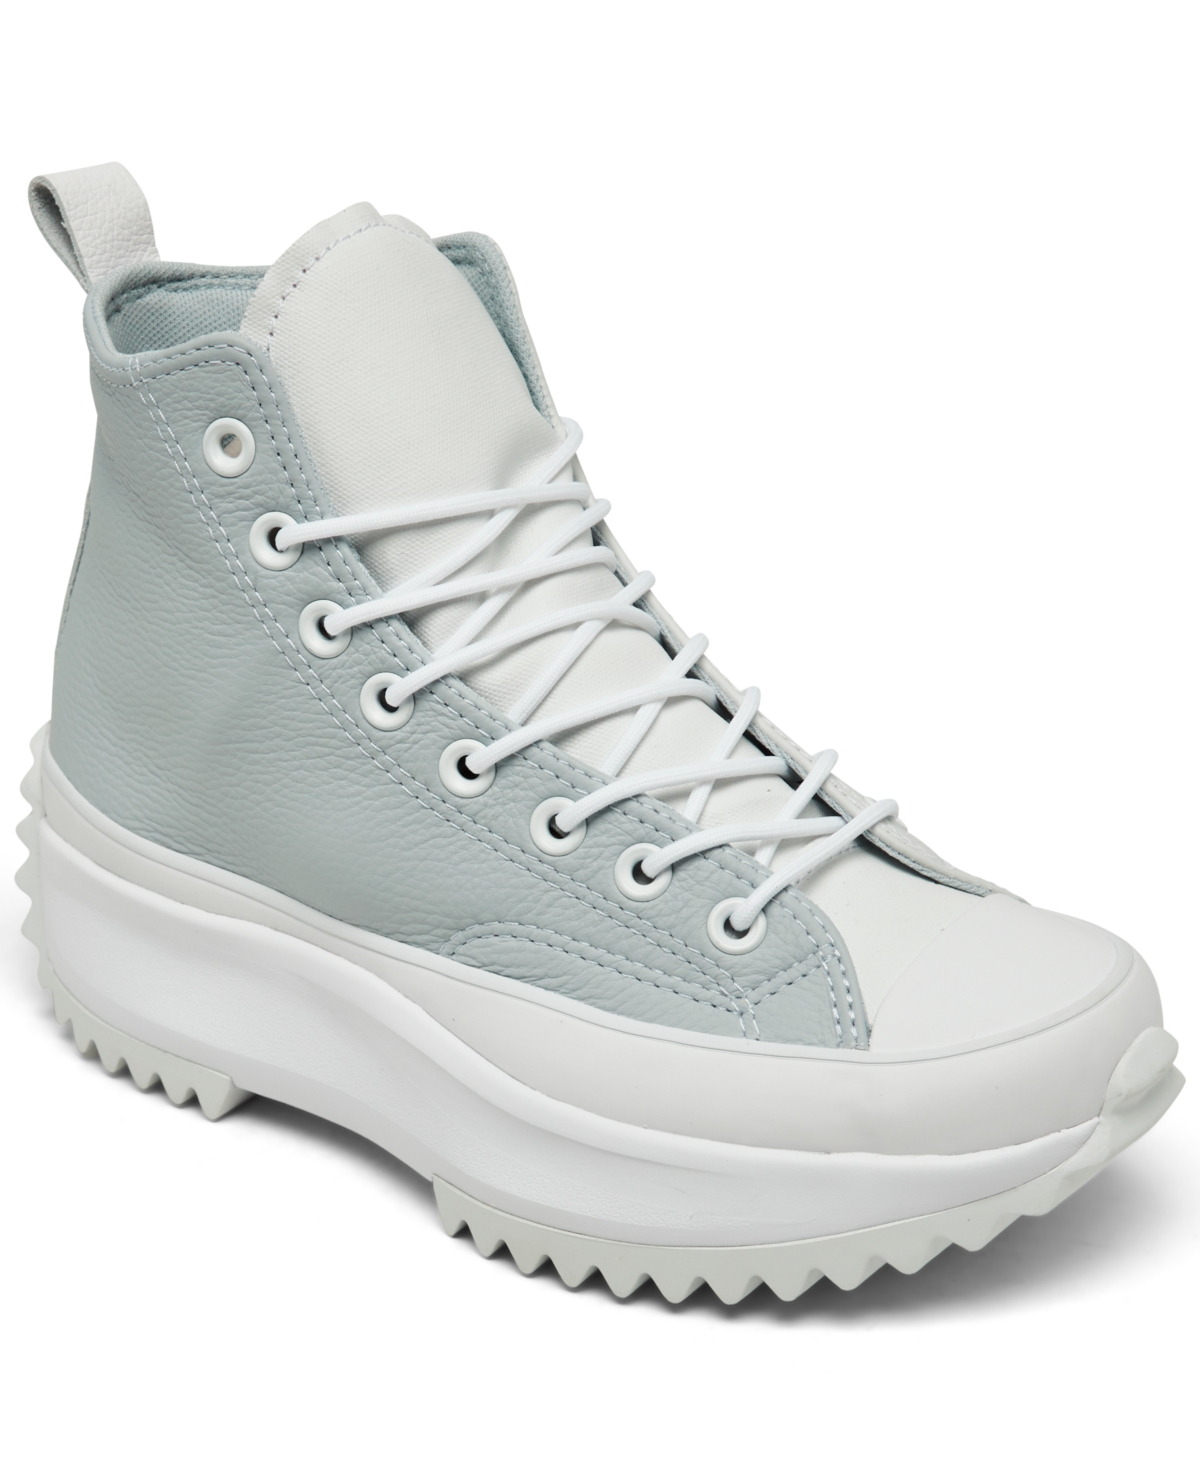 Women's Run Star Hike Platform Utility Leather High Top Sneaker Boots from Finish Line - White, Moonbathe